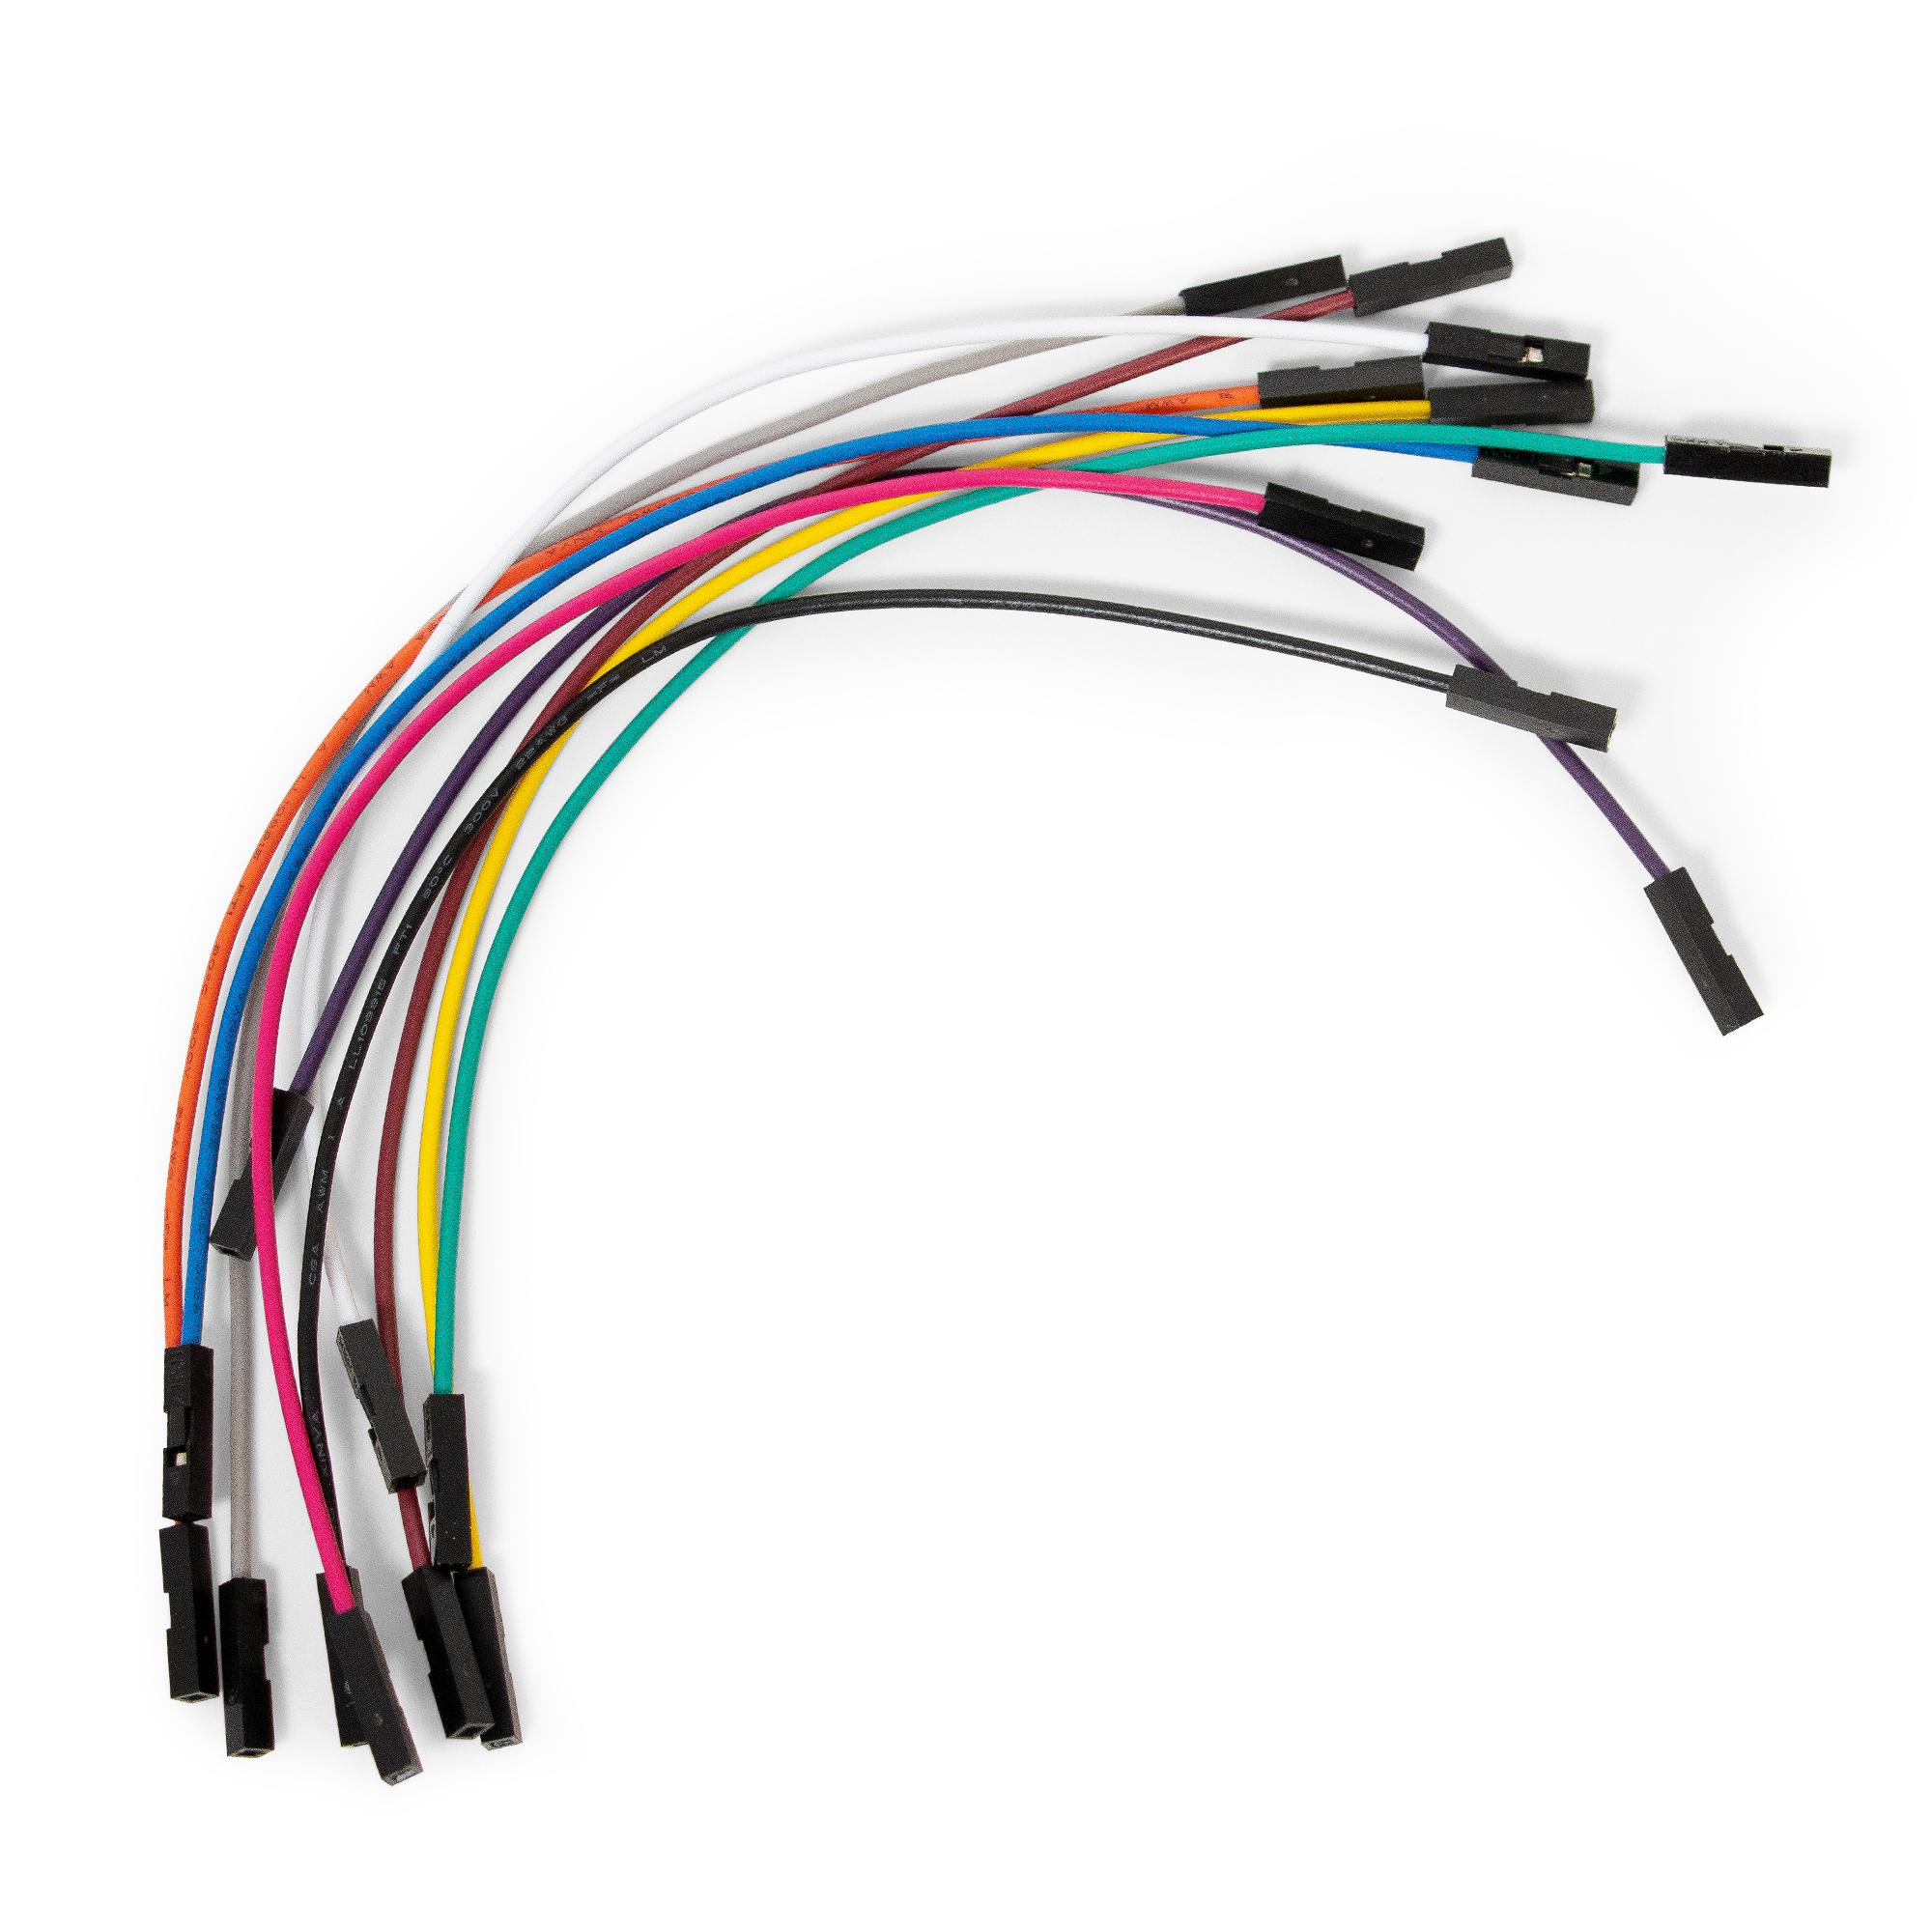 Ten colorful jumper wires